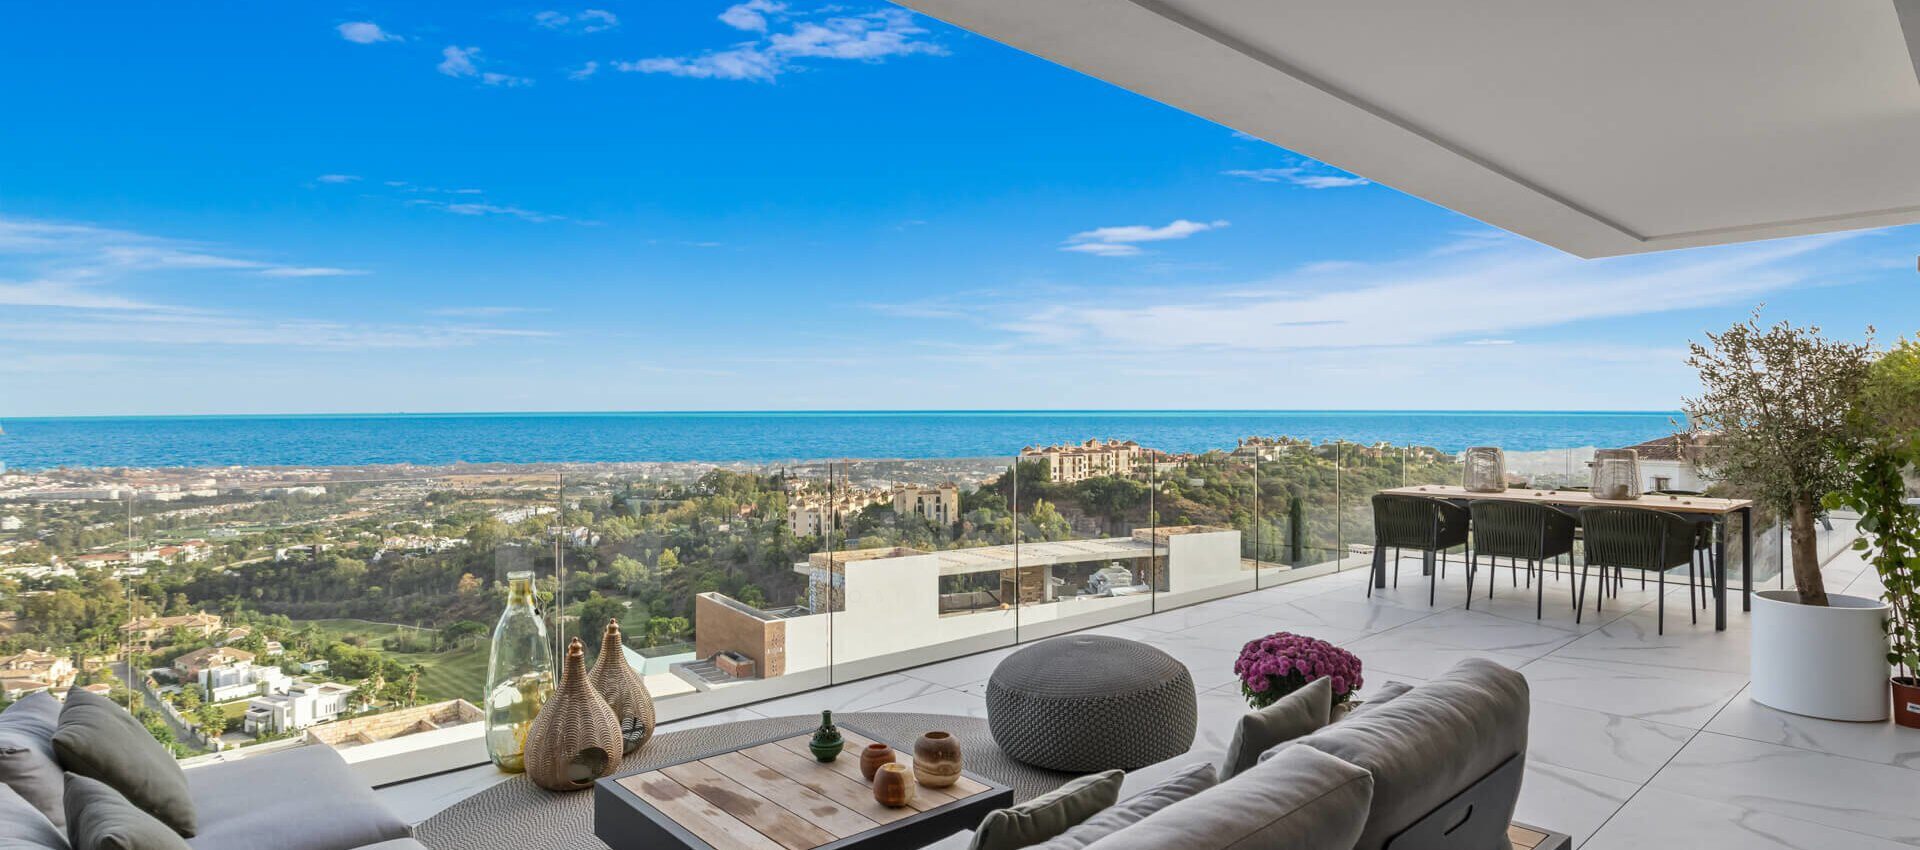 Luxury apartment with the highest quality standards and panoramic sea views